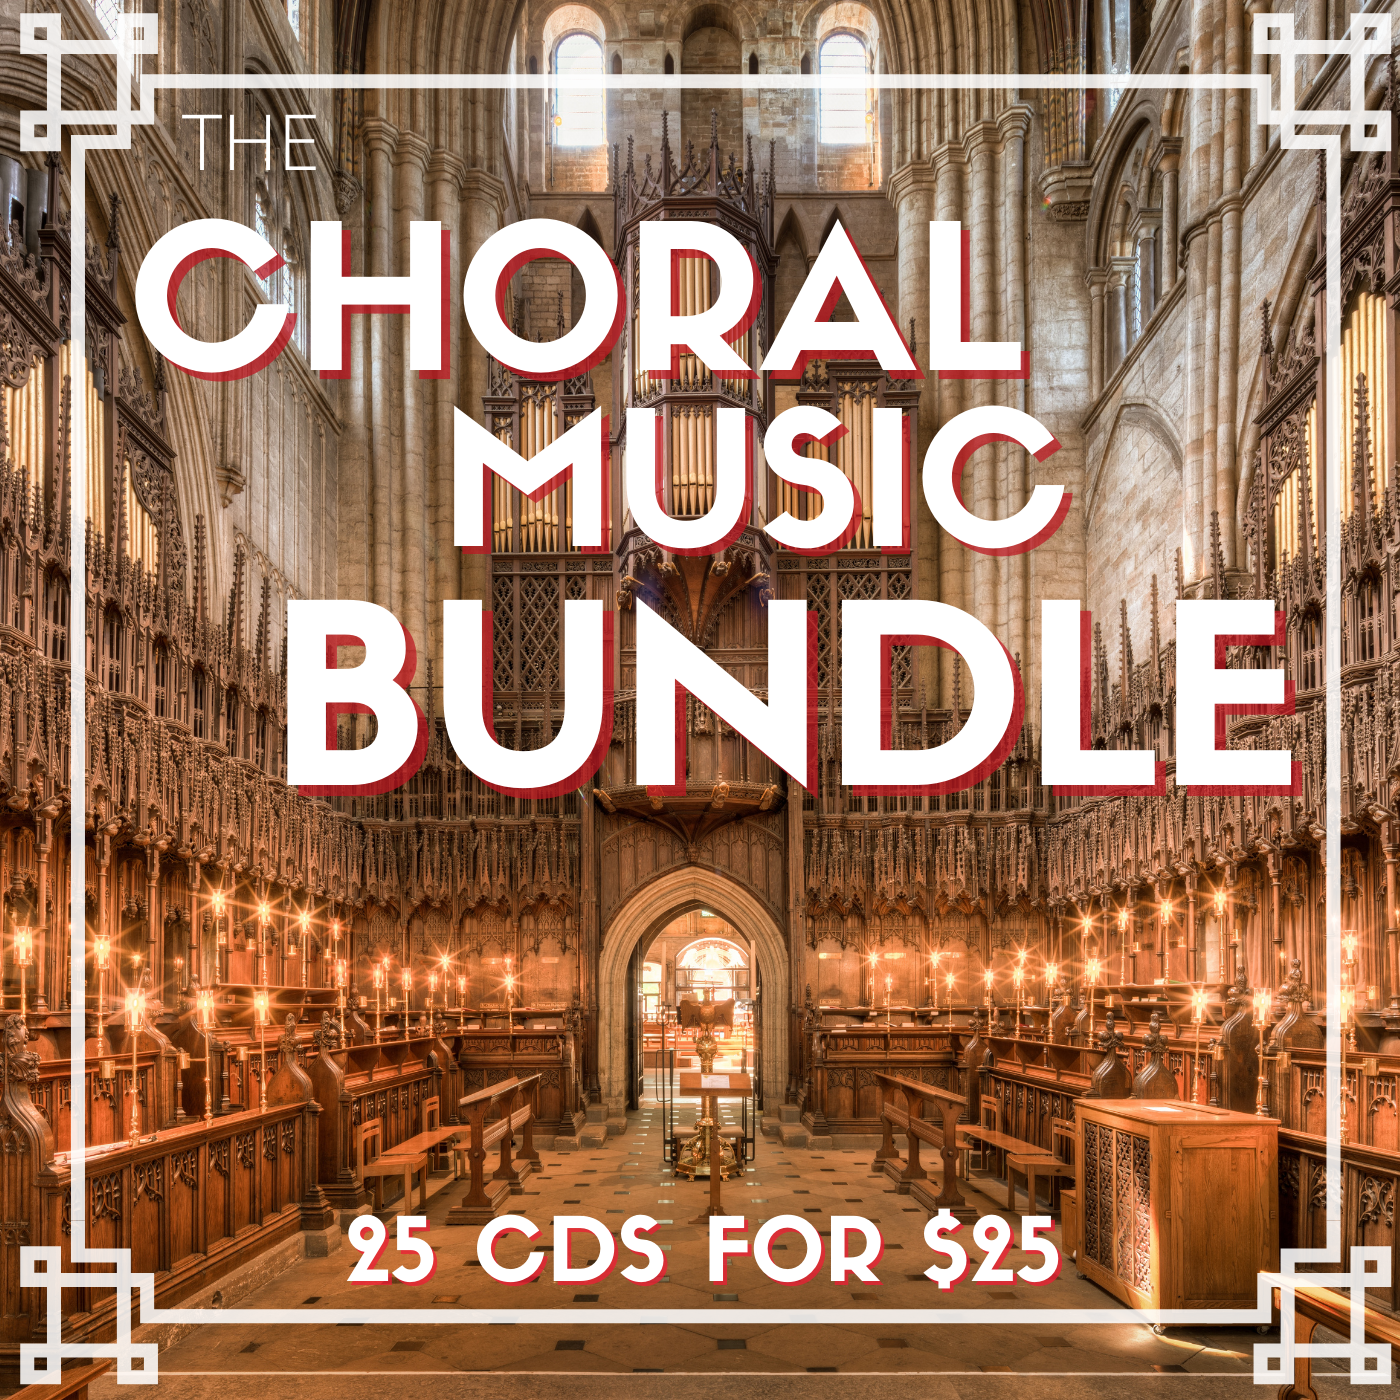 THE CHORAL MUSIC BUNDLE - 25 CDs for $25